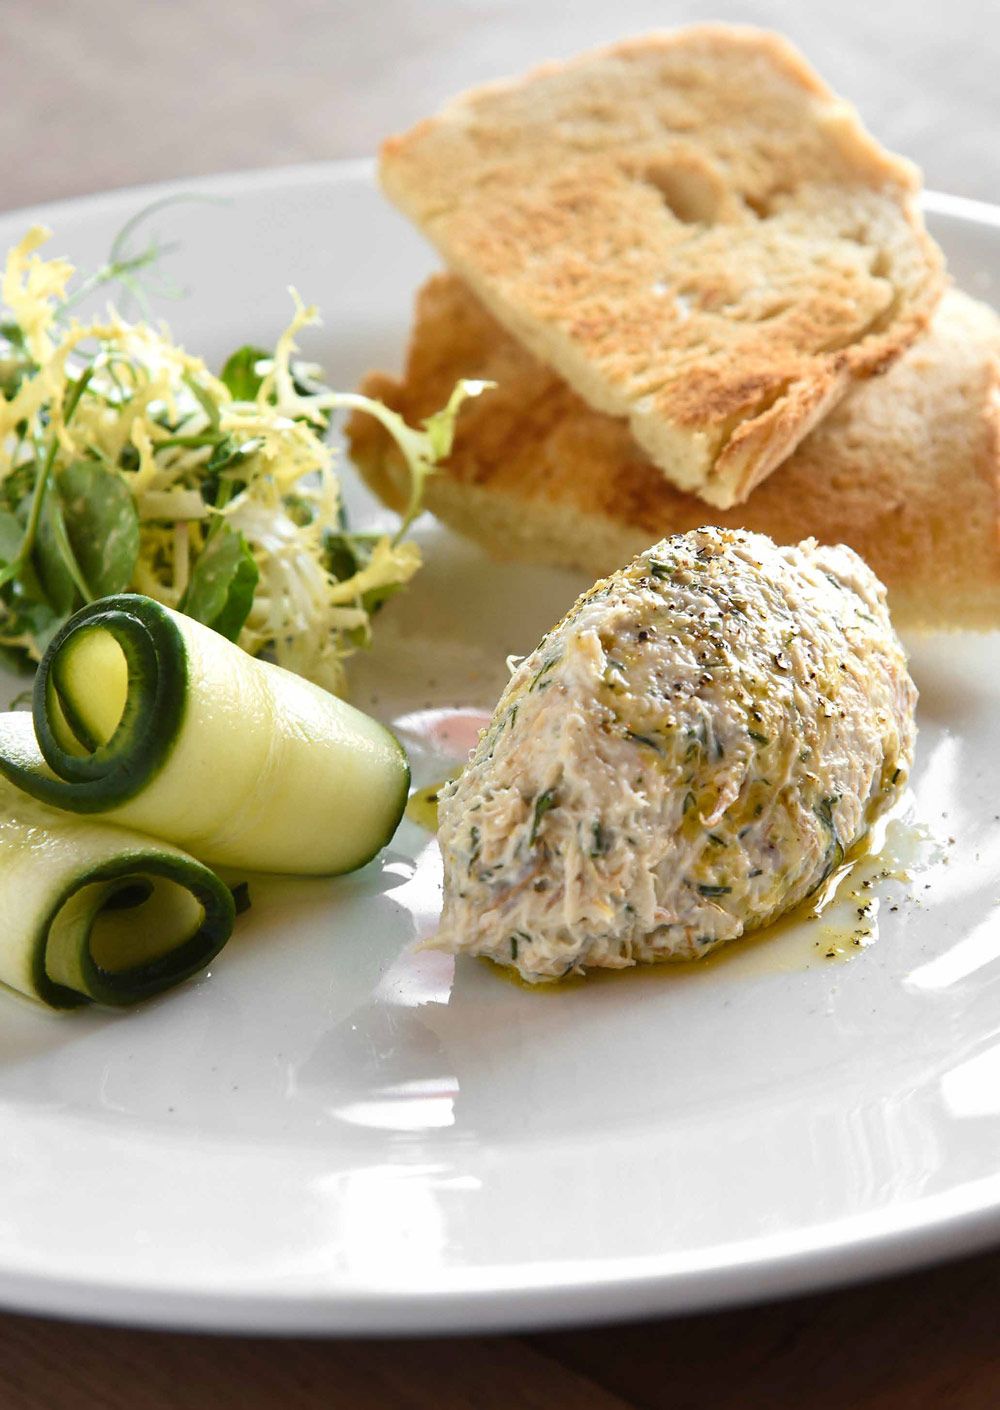 SMOKED MACKEREL PATE WITH PICKLED CUCUMBER